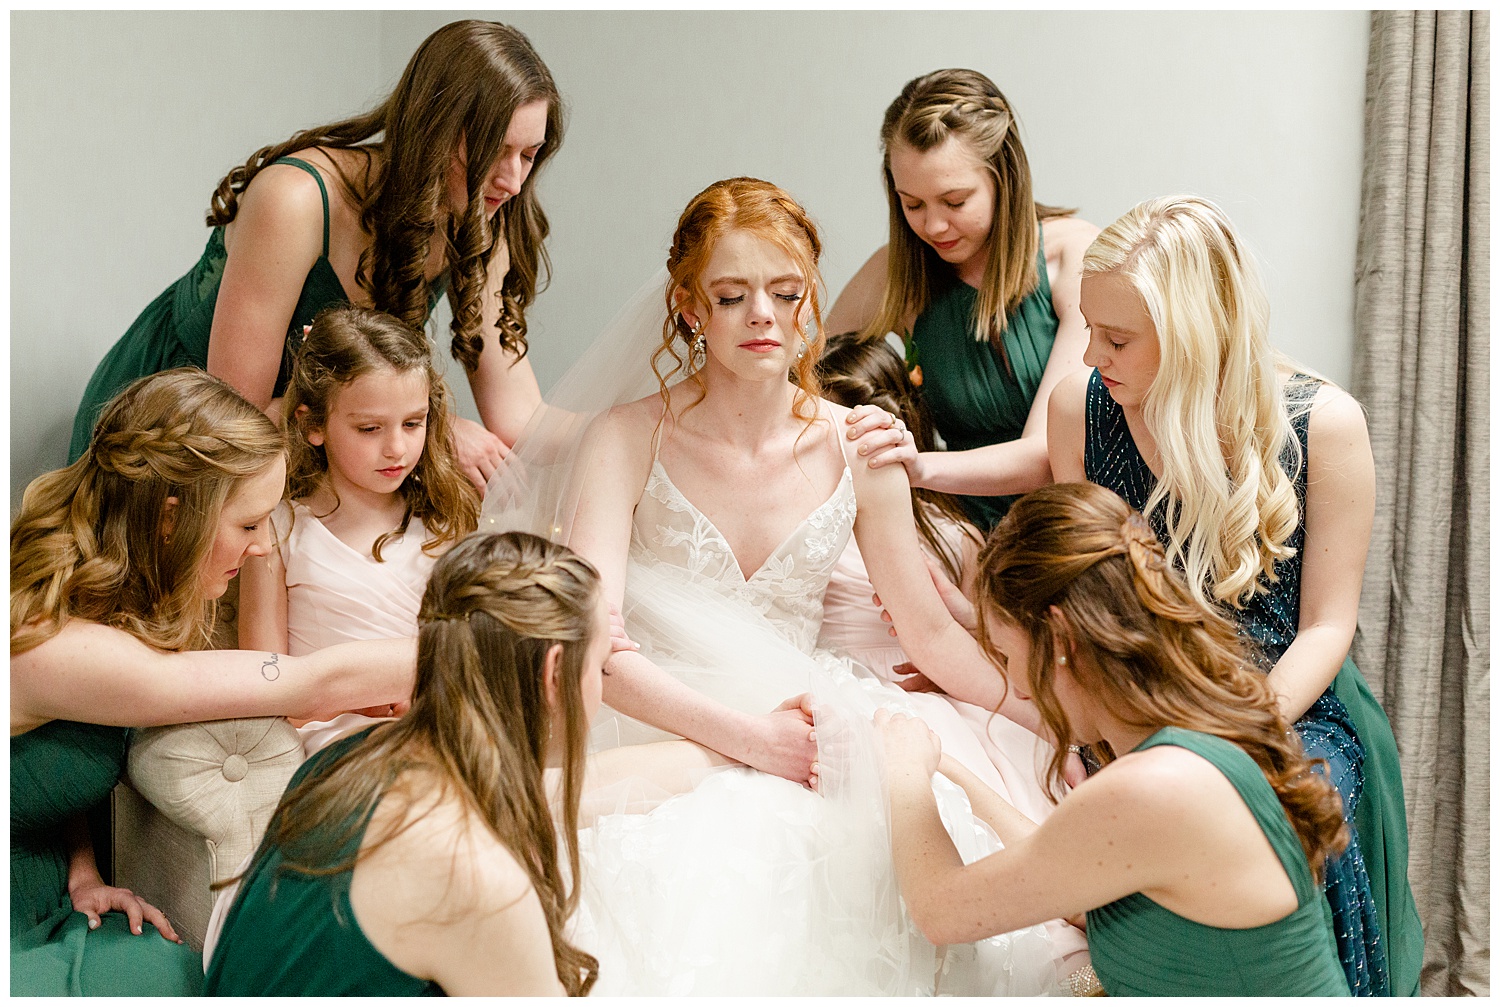 Bridesmaids praying over the bride on her wedding day.